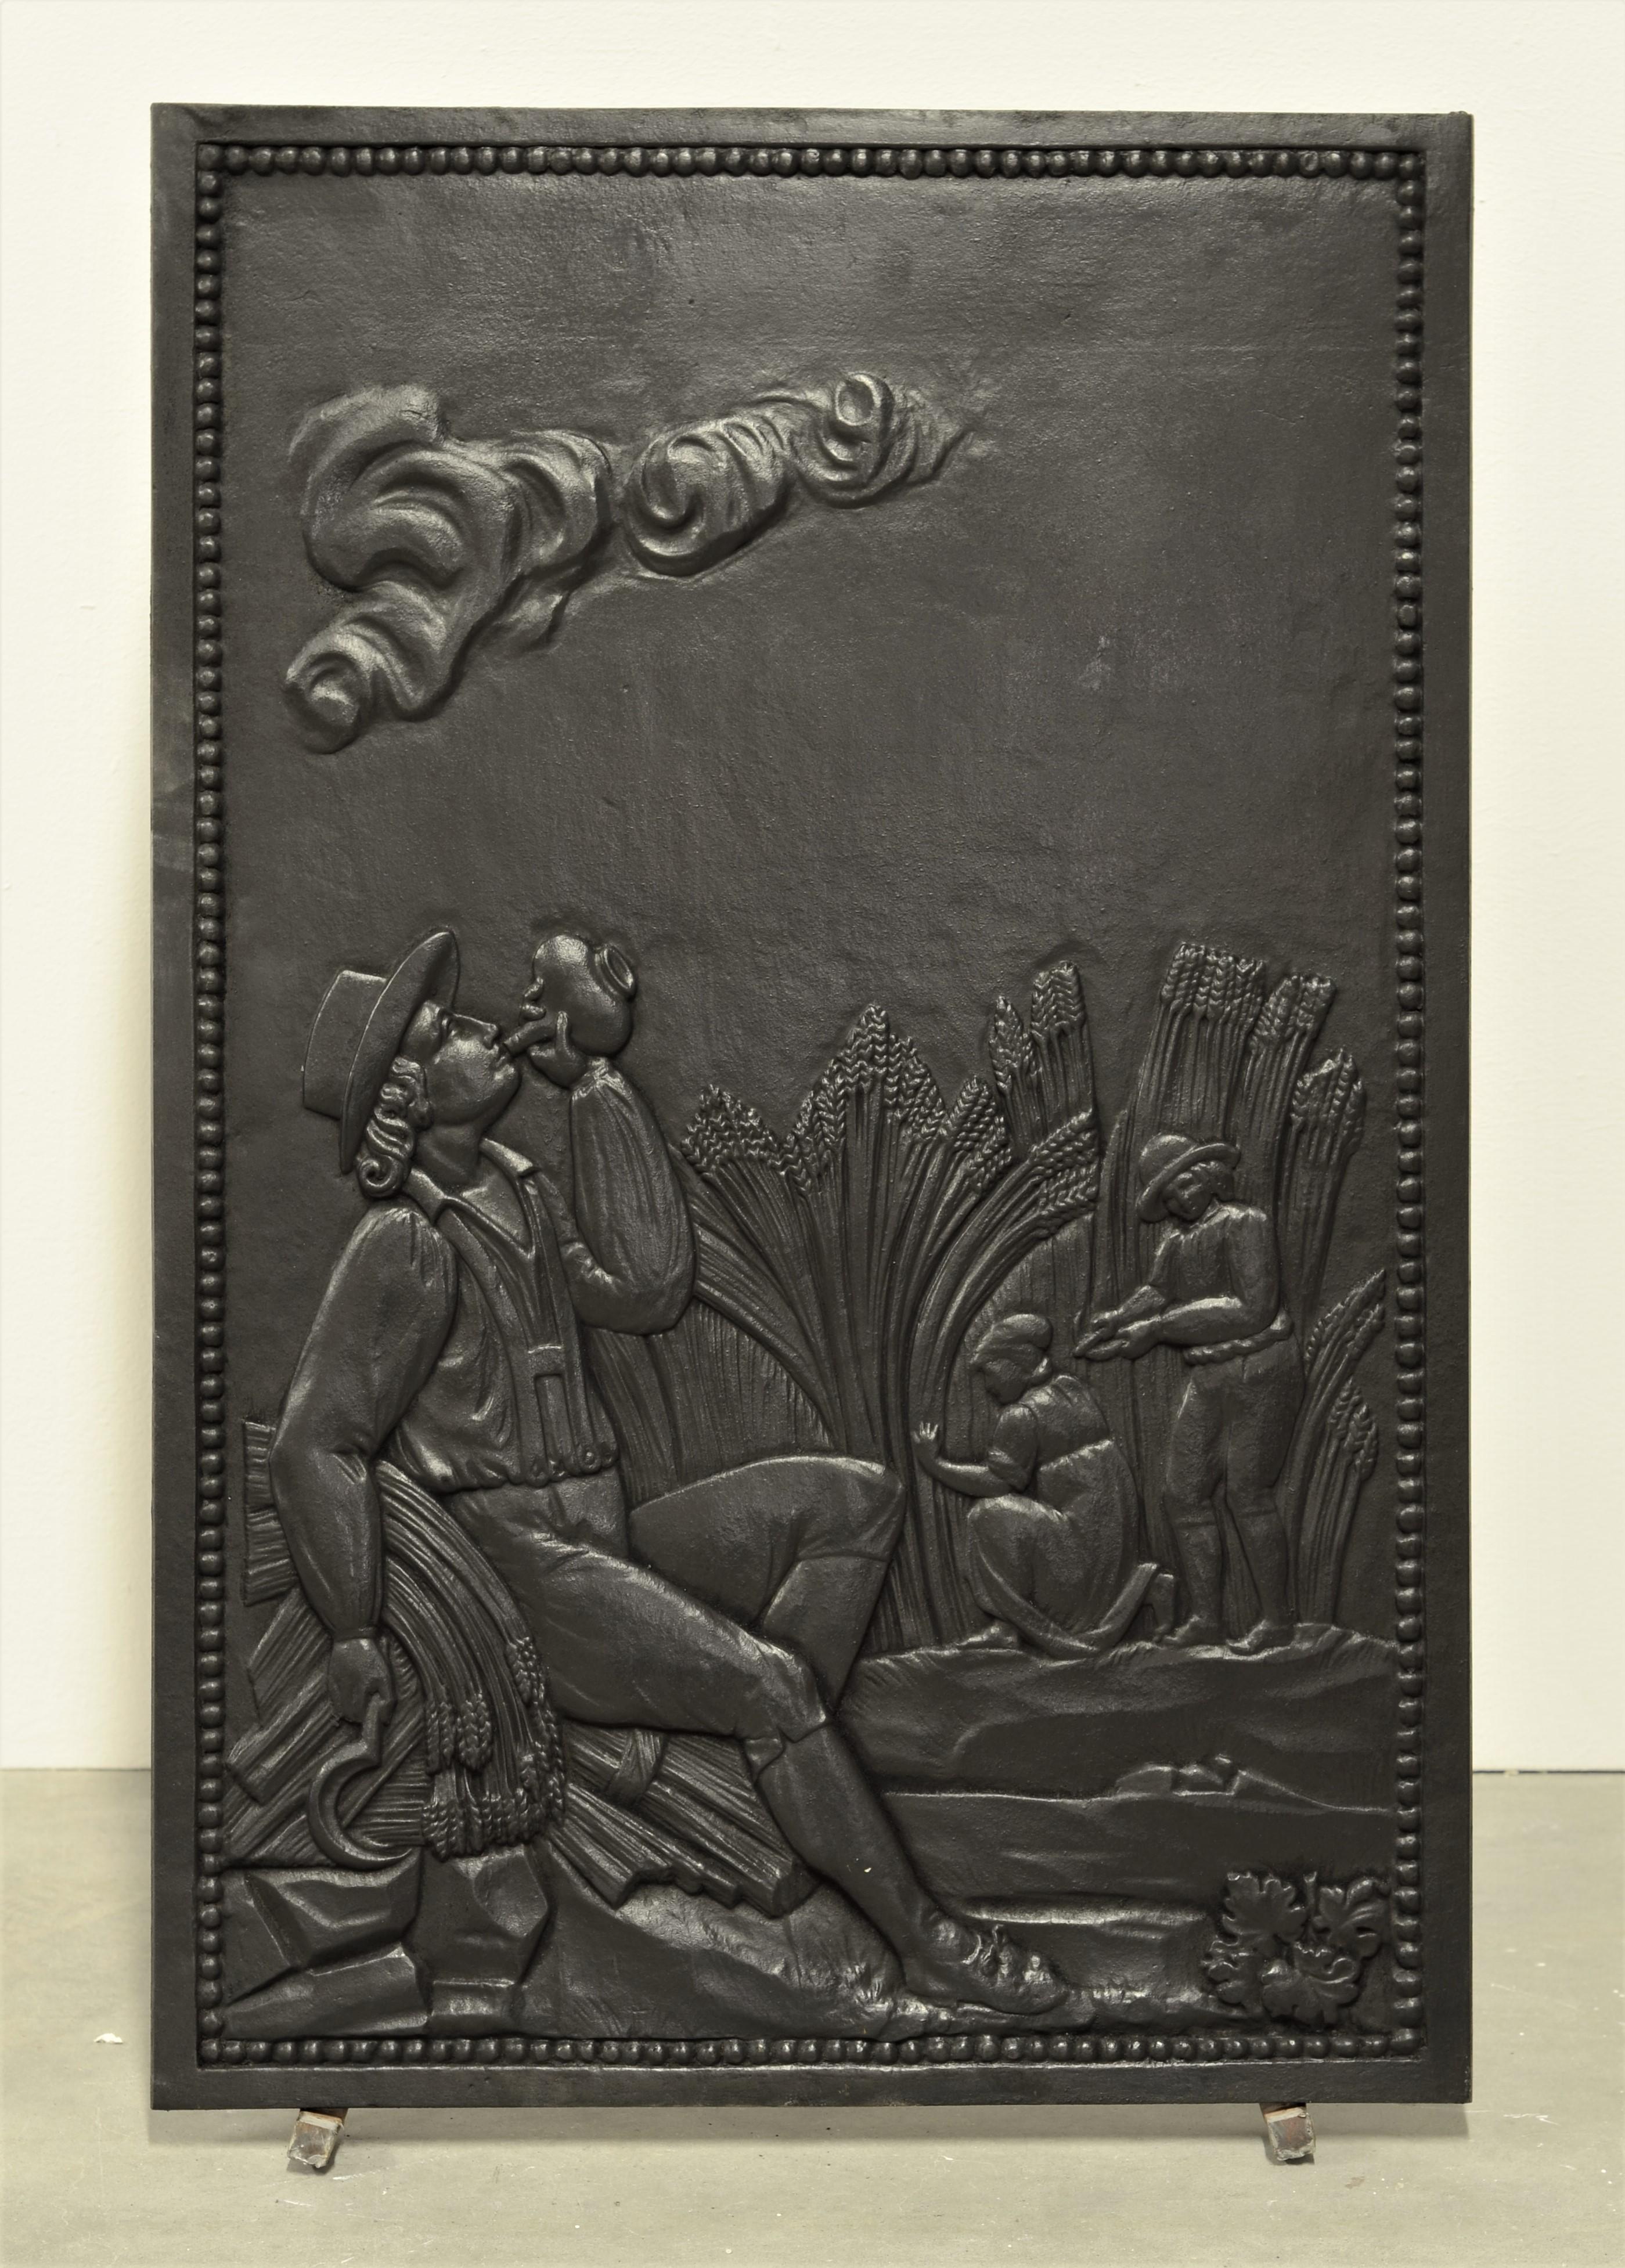 - Antique fireback or backsplash - Drinking During the Corn Harvest-

A nice decorative, detailed and tall fireback/ backsplash.

Displaying a harvester taking a brake and drinking from his flask while two workers keep working in the